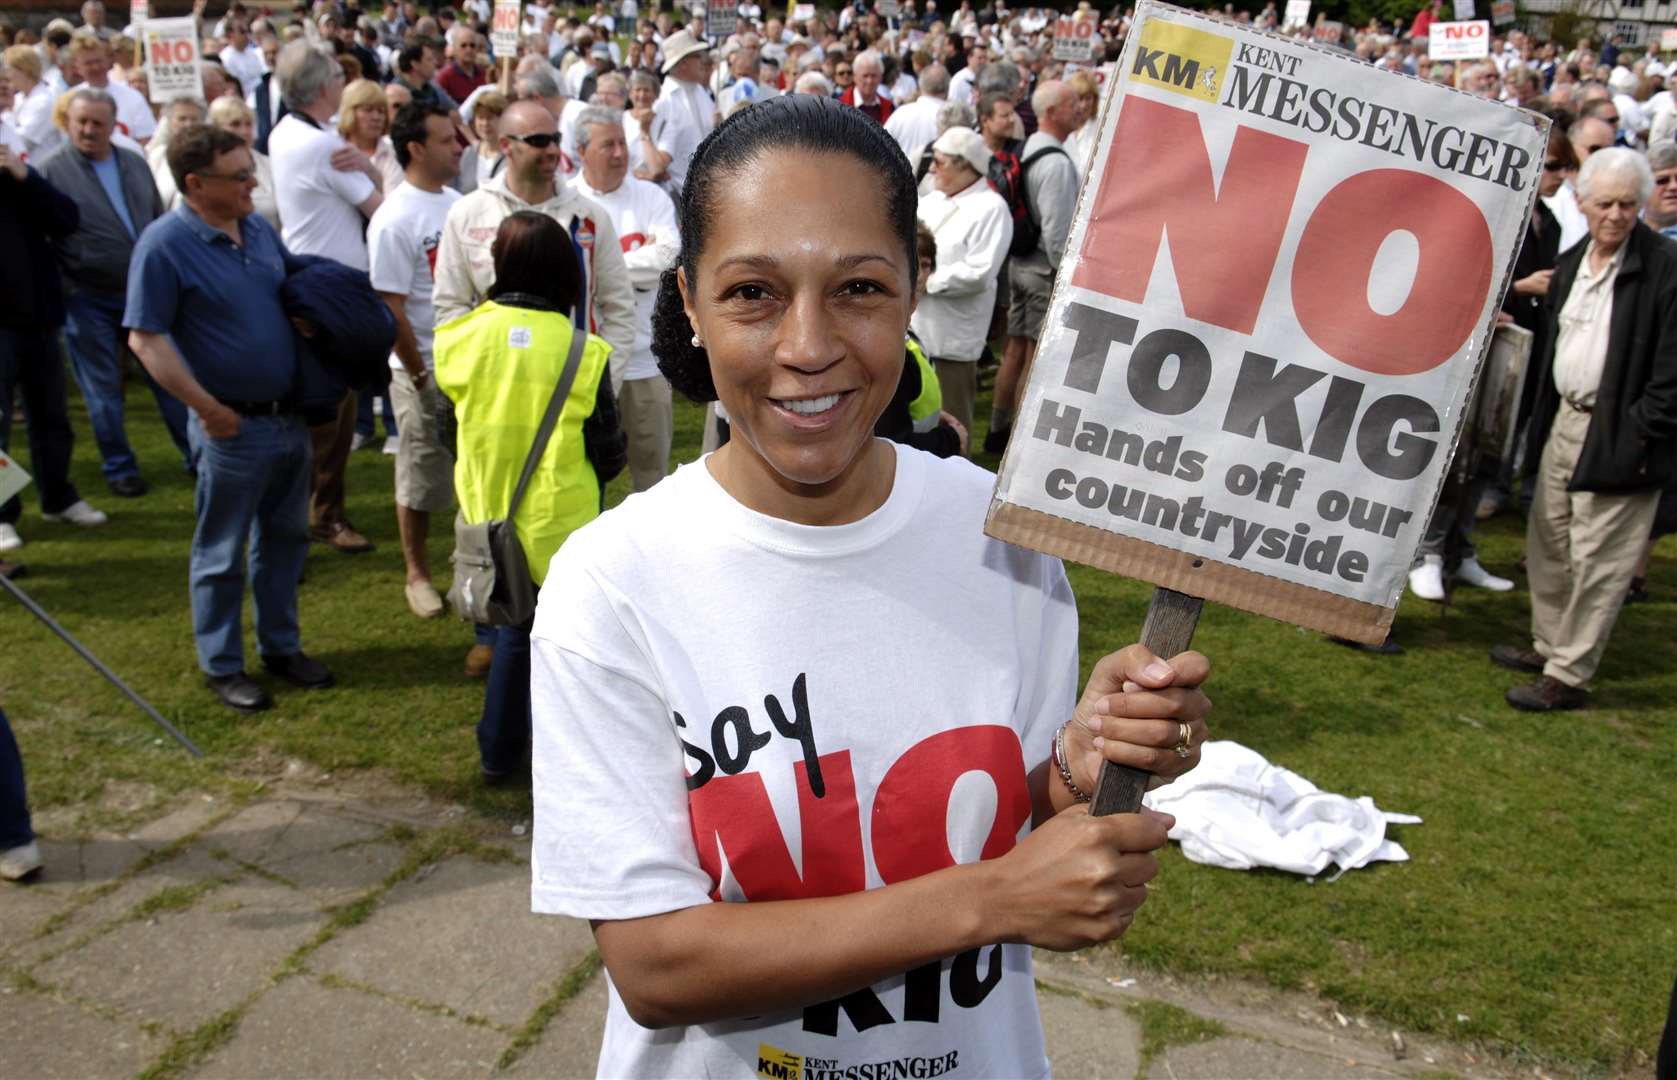 MP Helen Grant joined the Stop KIG demonstration march on Bearsted Green. Picture: Matthew Reading